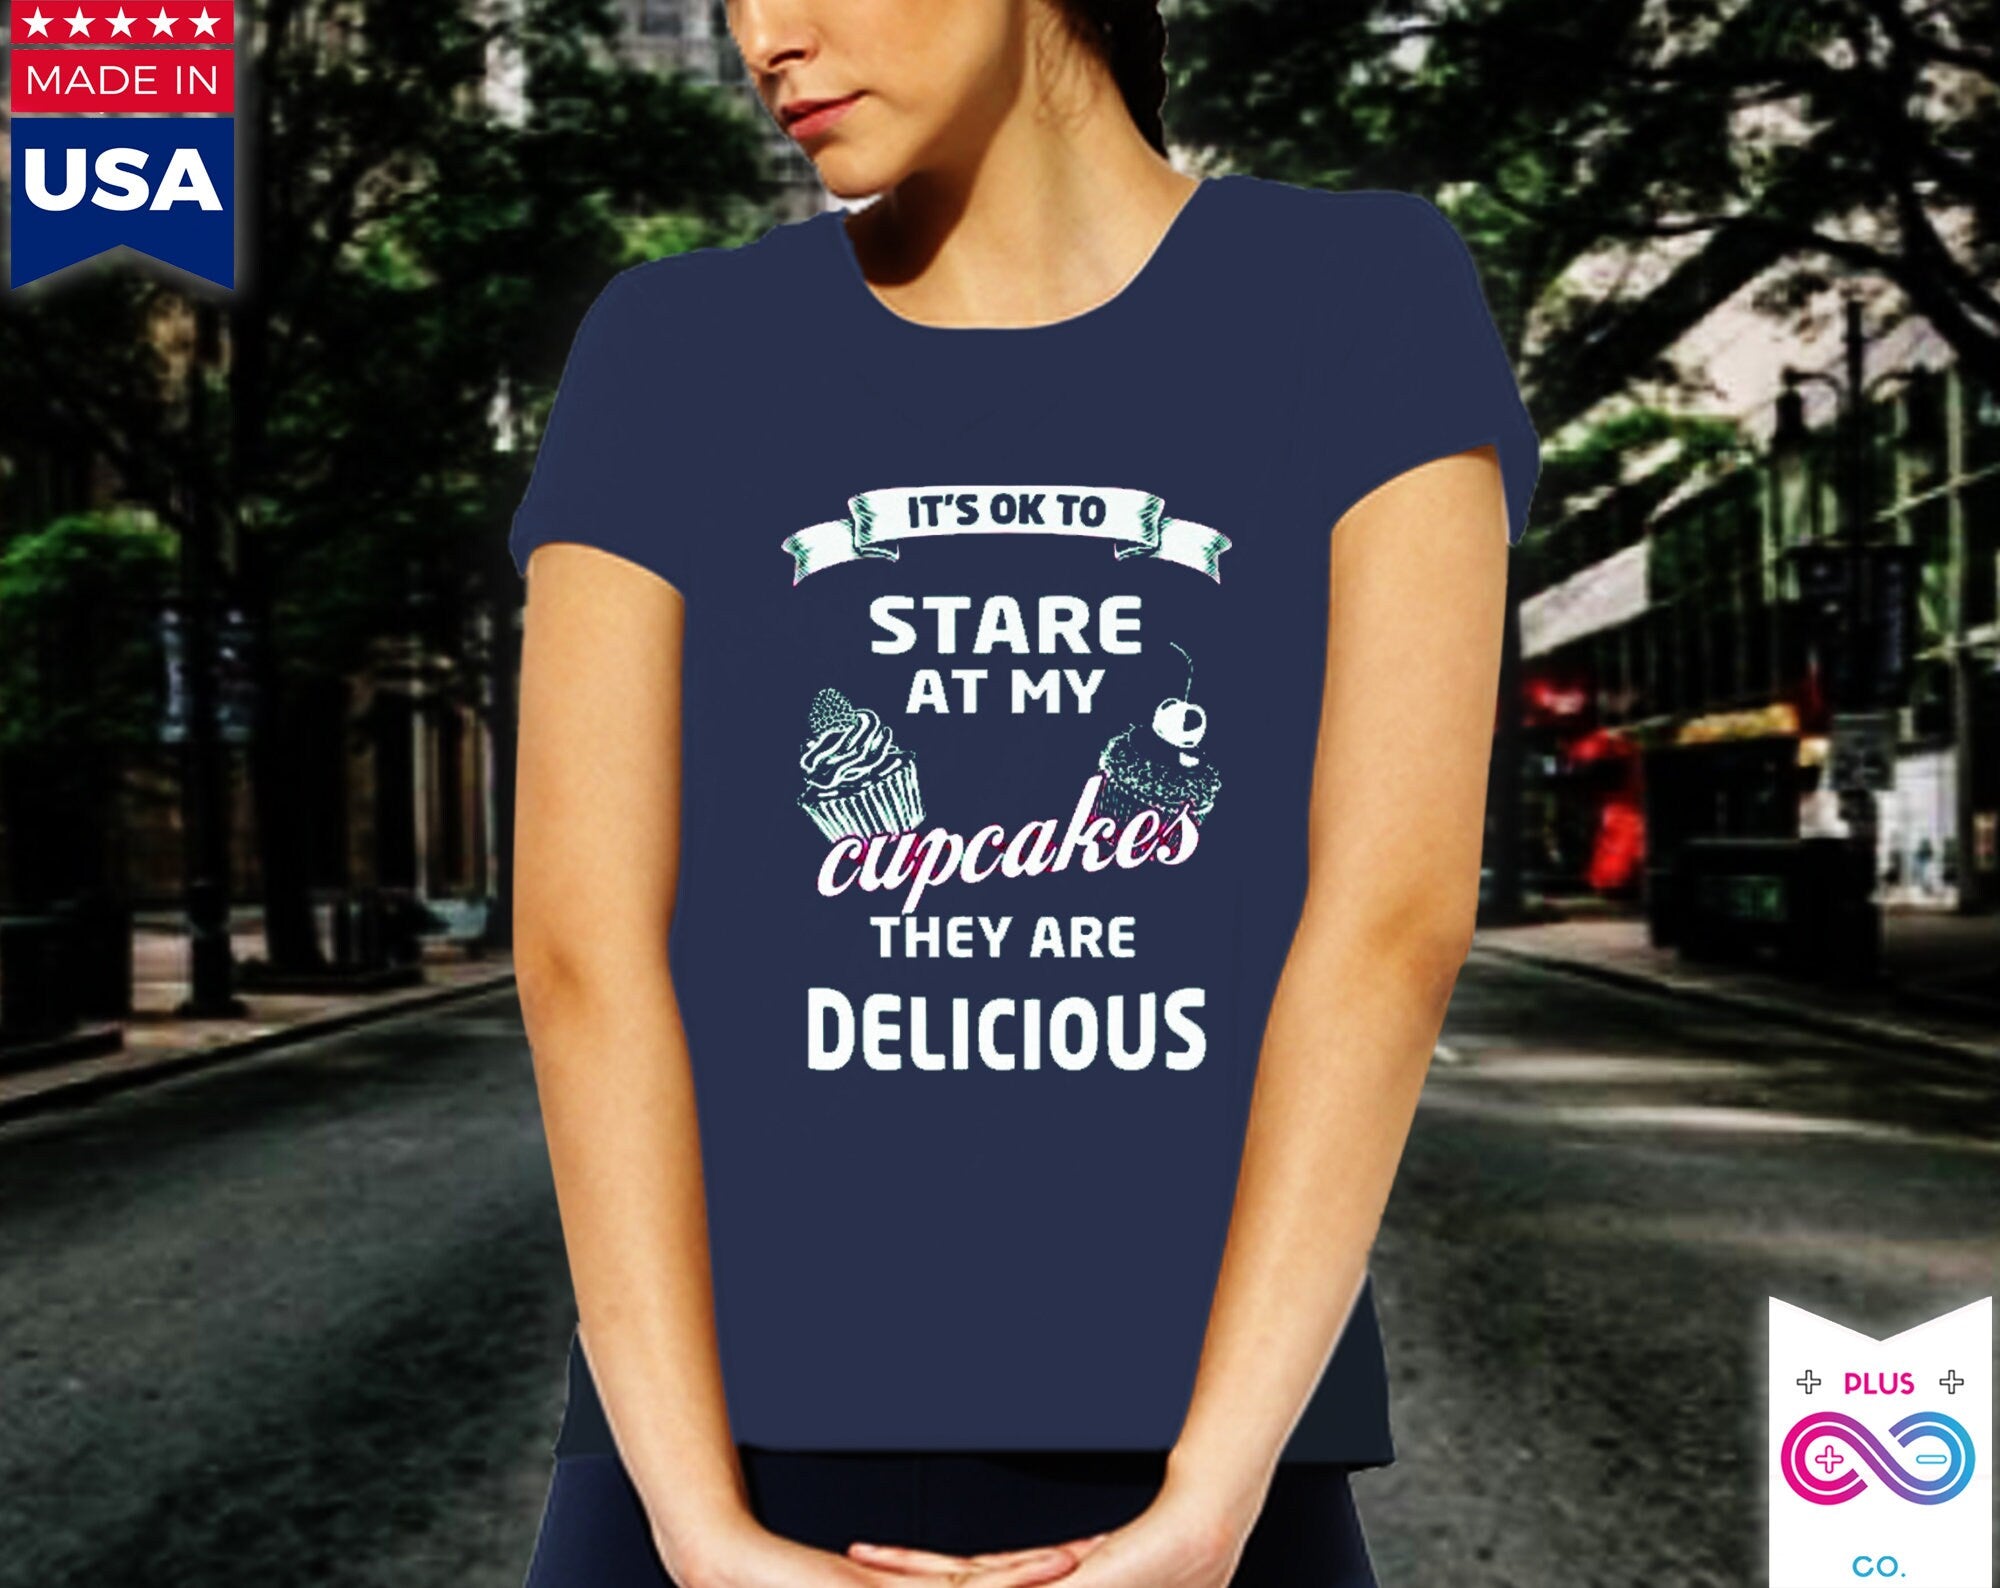 It&#39;s OK to Stare at my Cupcakes They are Delicious Women&#39;s Favorite Tee, Humorous Shirt, Best Seller Shirt, Great Funny Gift for Her - plusminusco.com